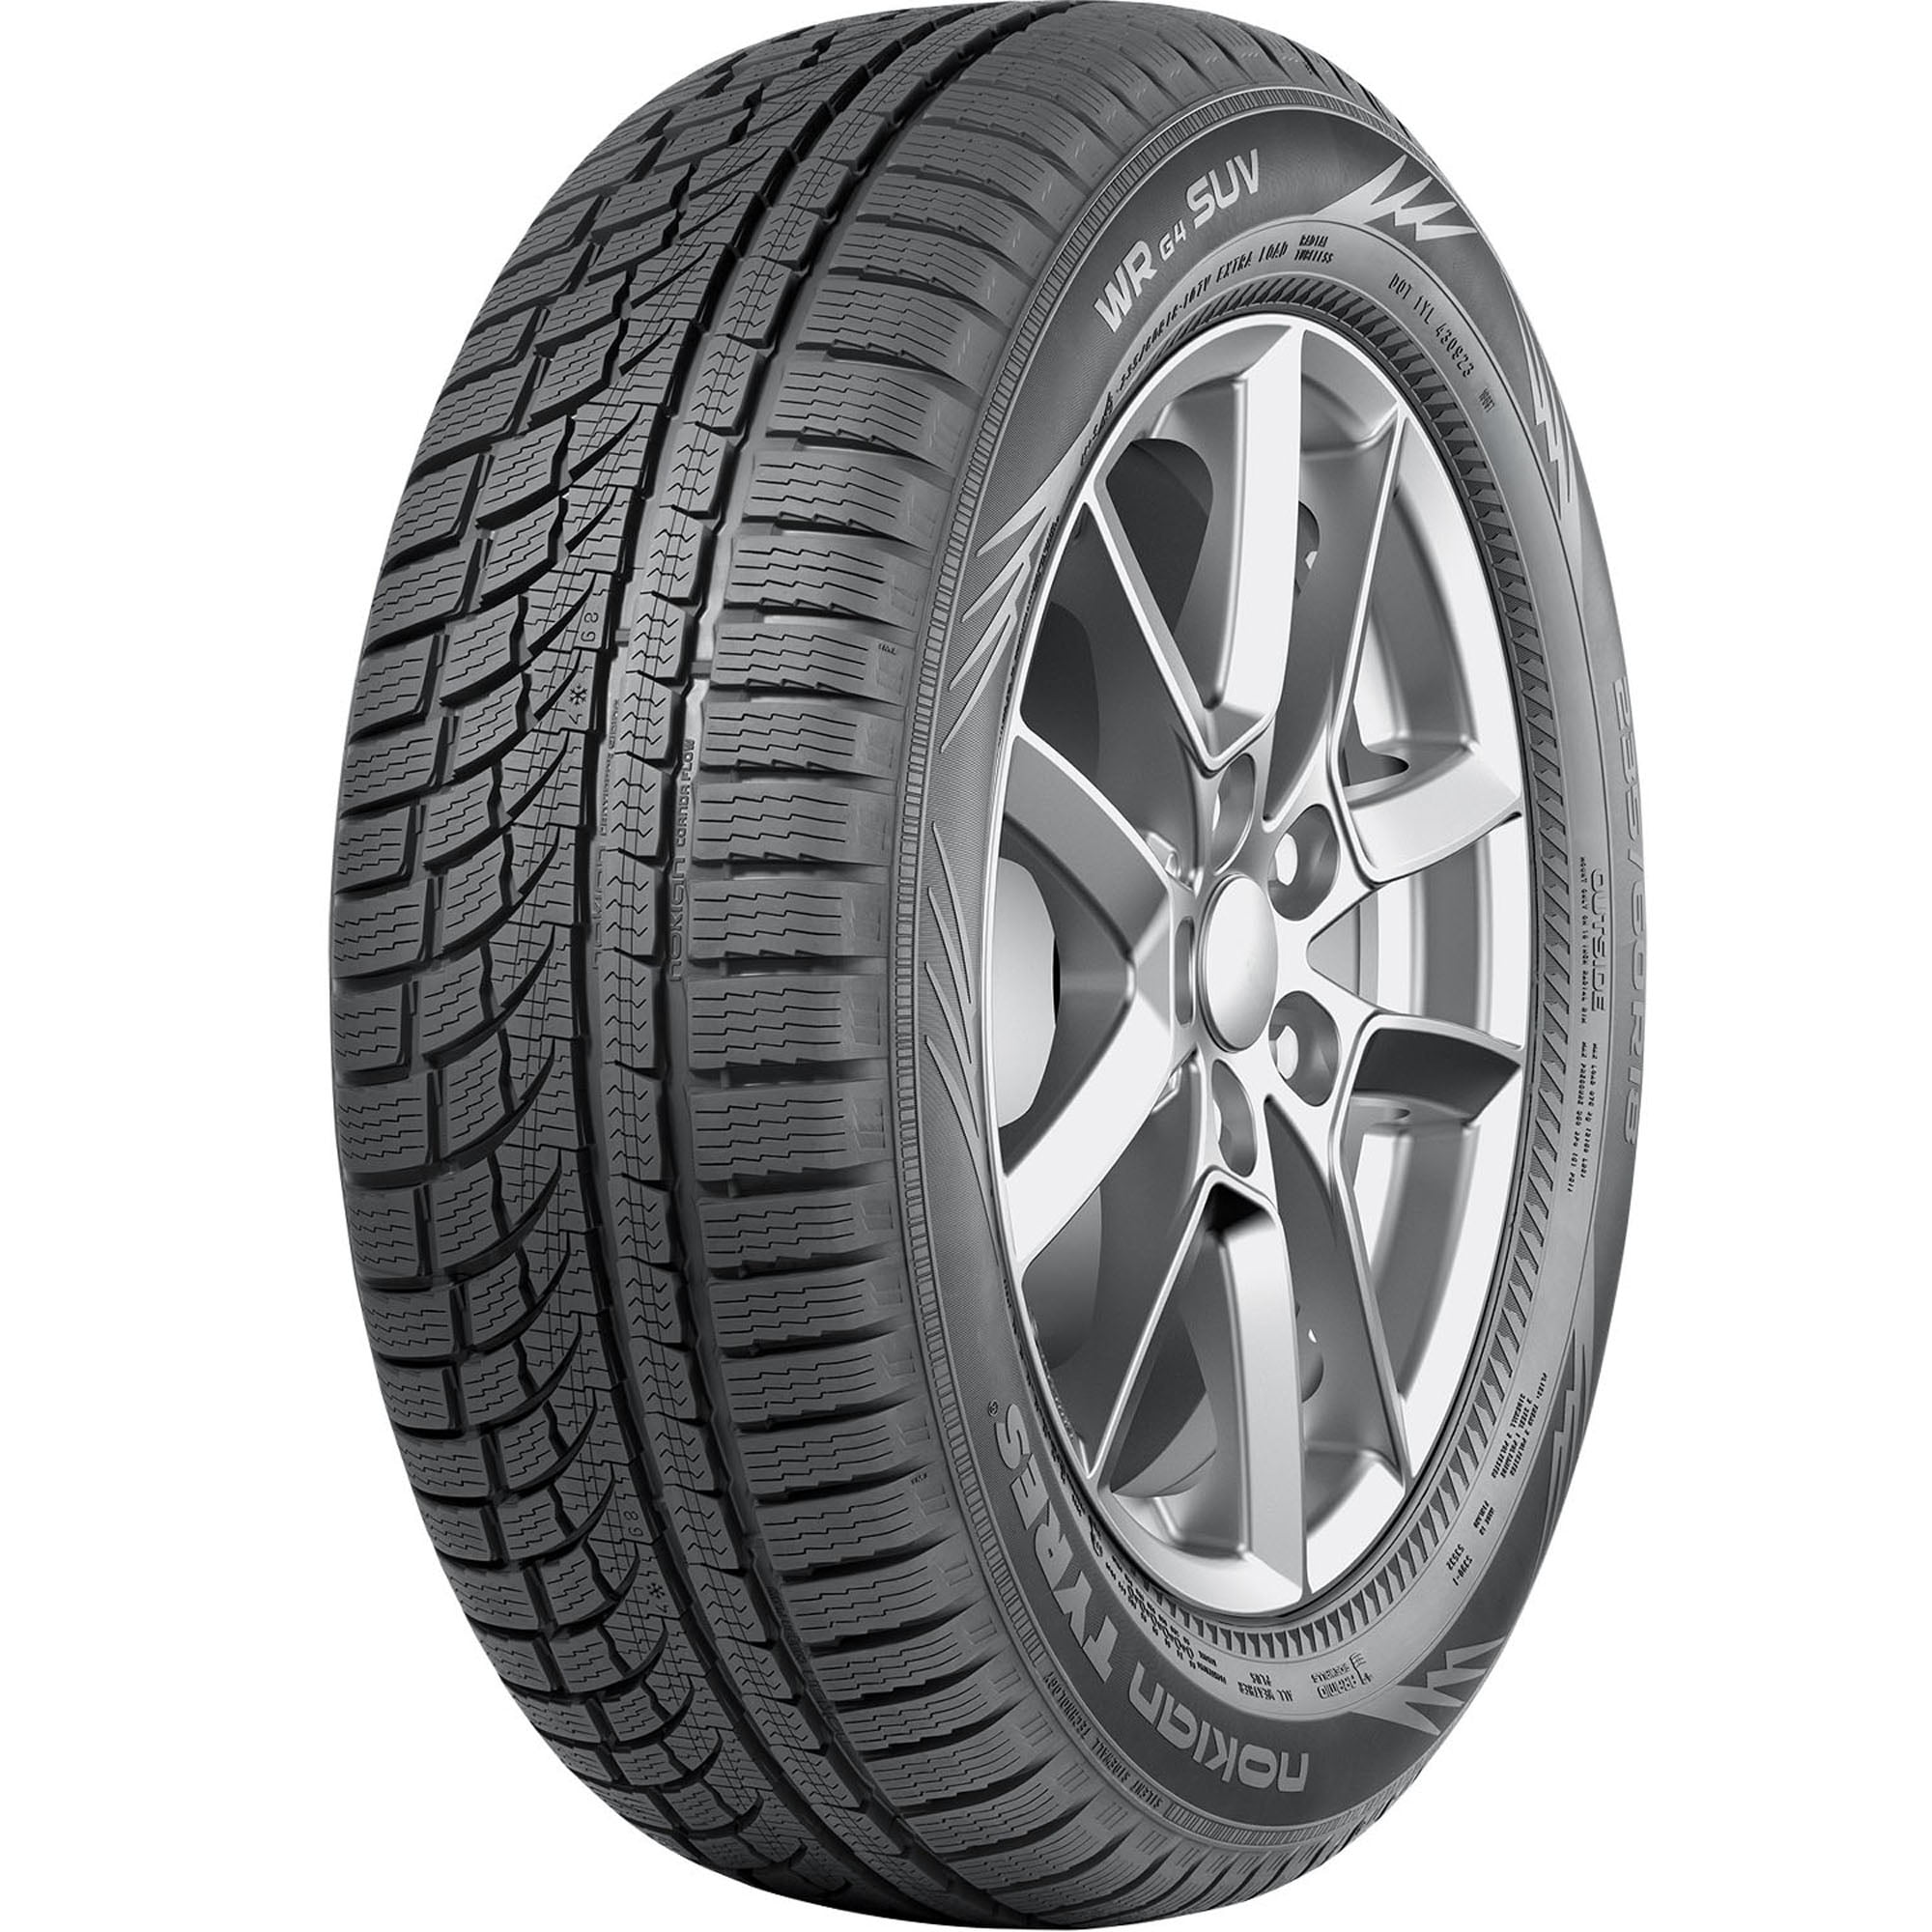 G4 235/55R19 XL SUV Weather WR All 105V SUV/Crossover Nokian Tire